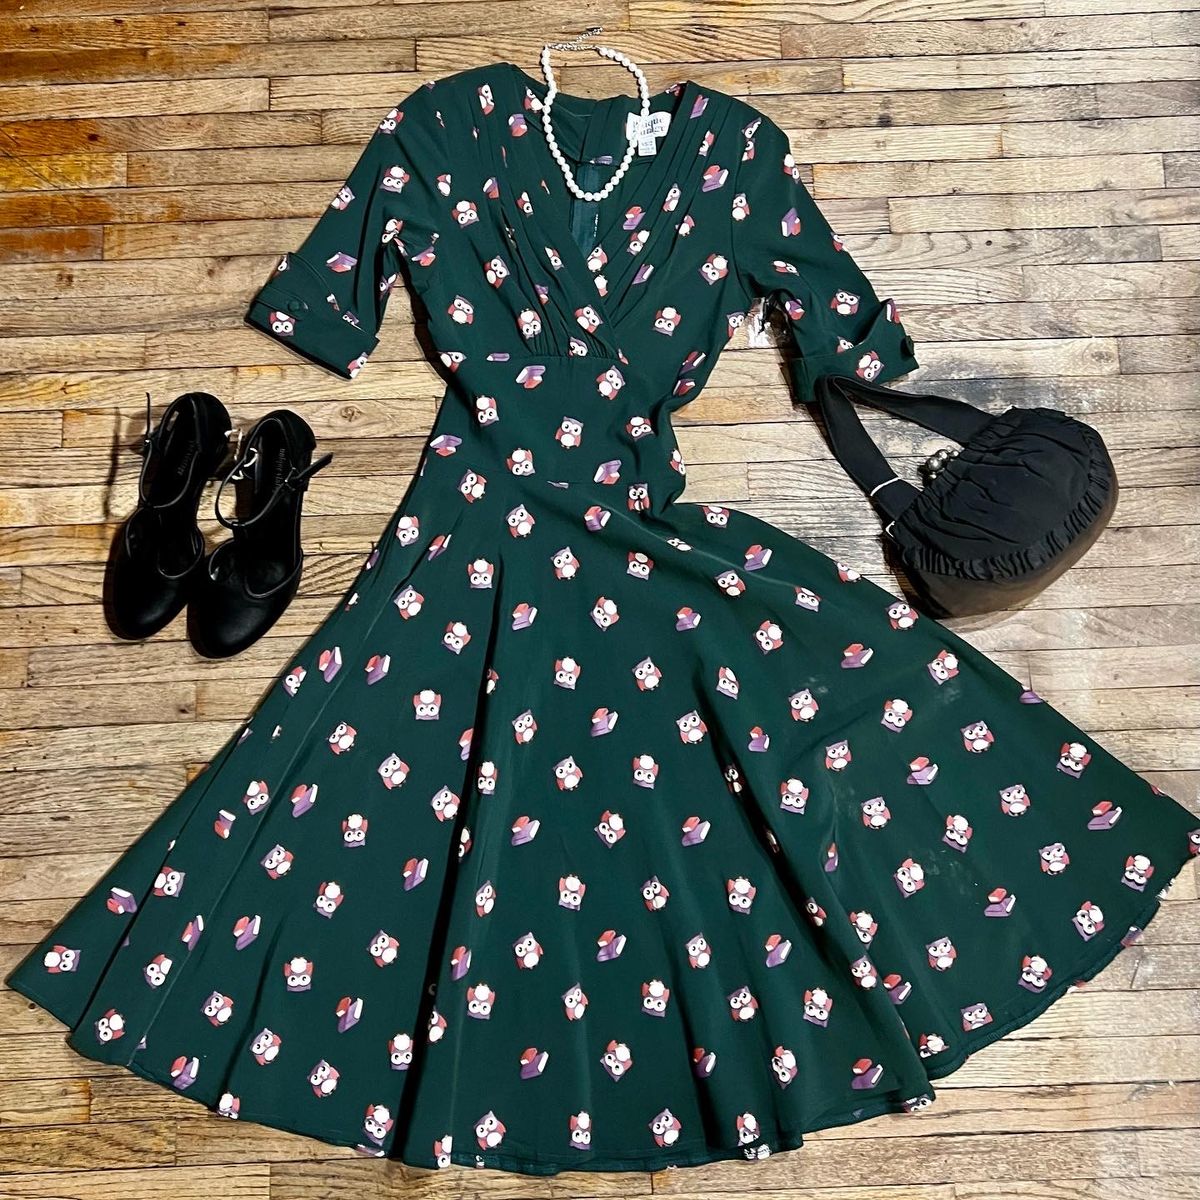 Swing Dress with owl pattern  1940s inspired